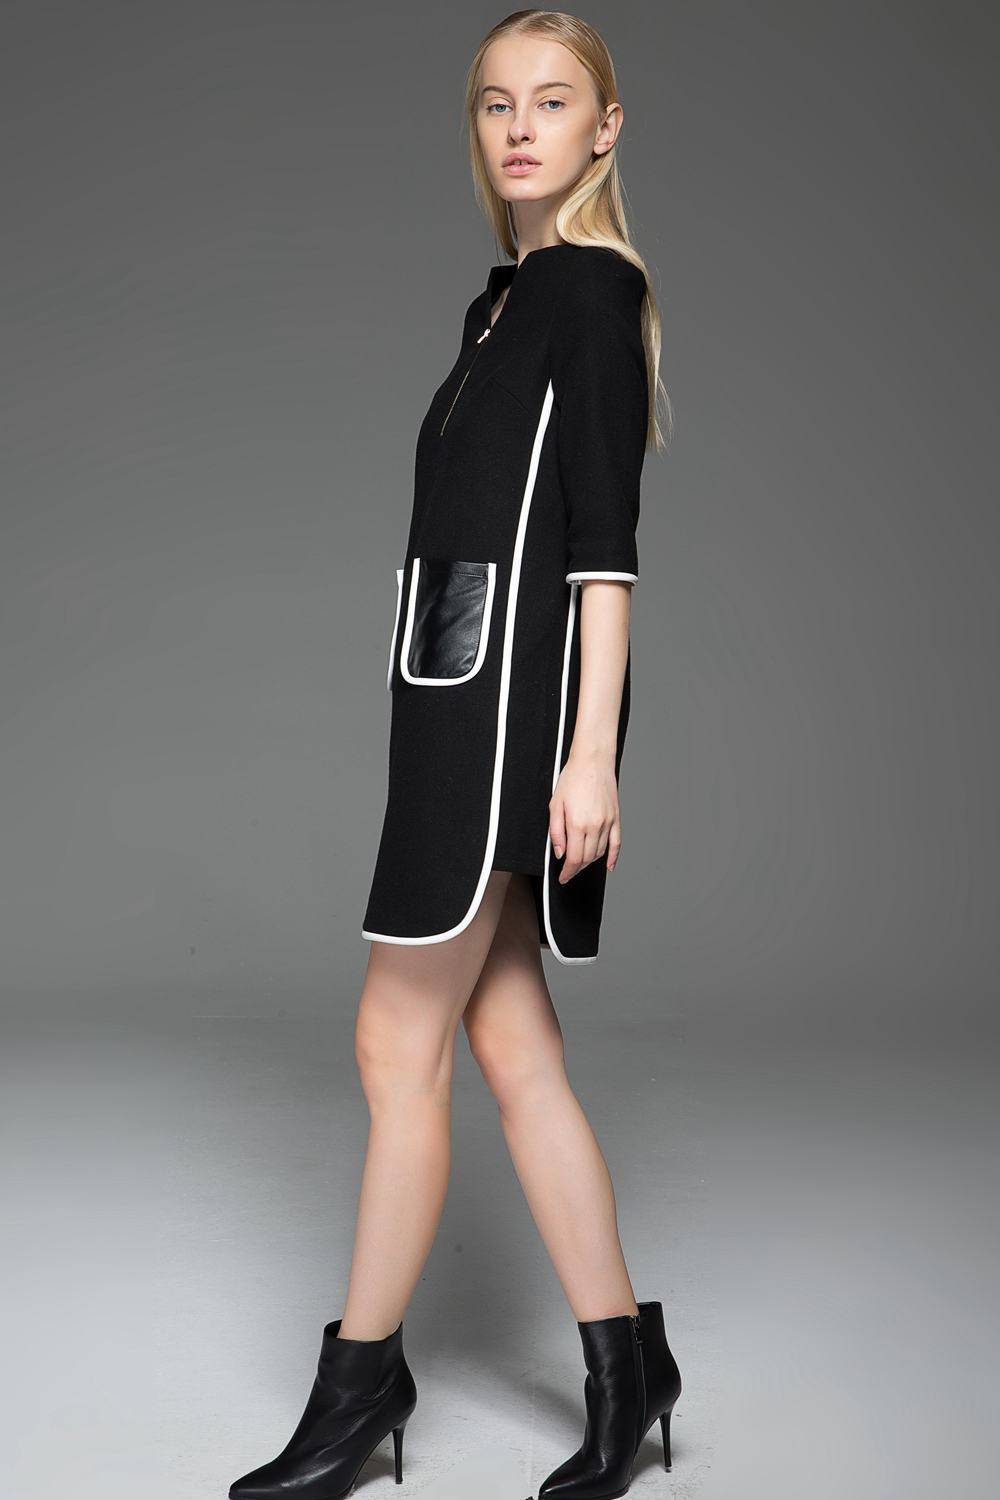 Chanel Style Dress - Black Wool Mini Dress with Cream Piping and Leather  Pockets 60s Era Vintage Style Womens Dress C778